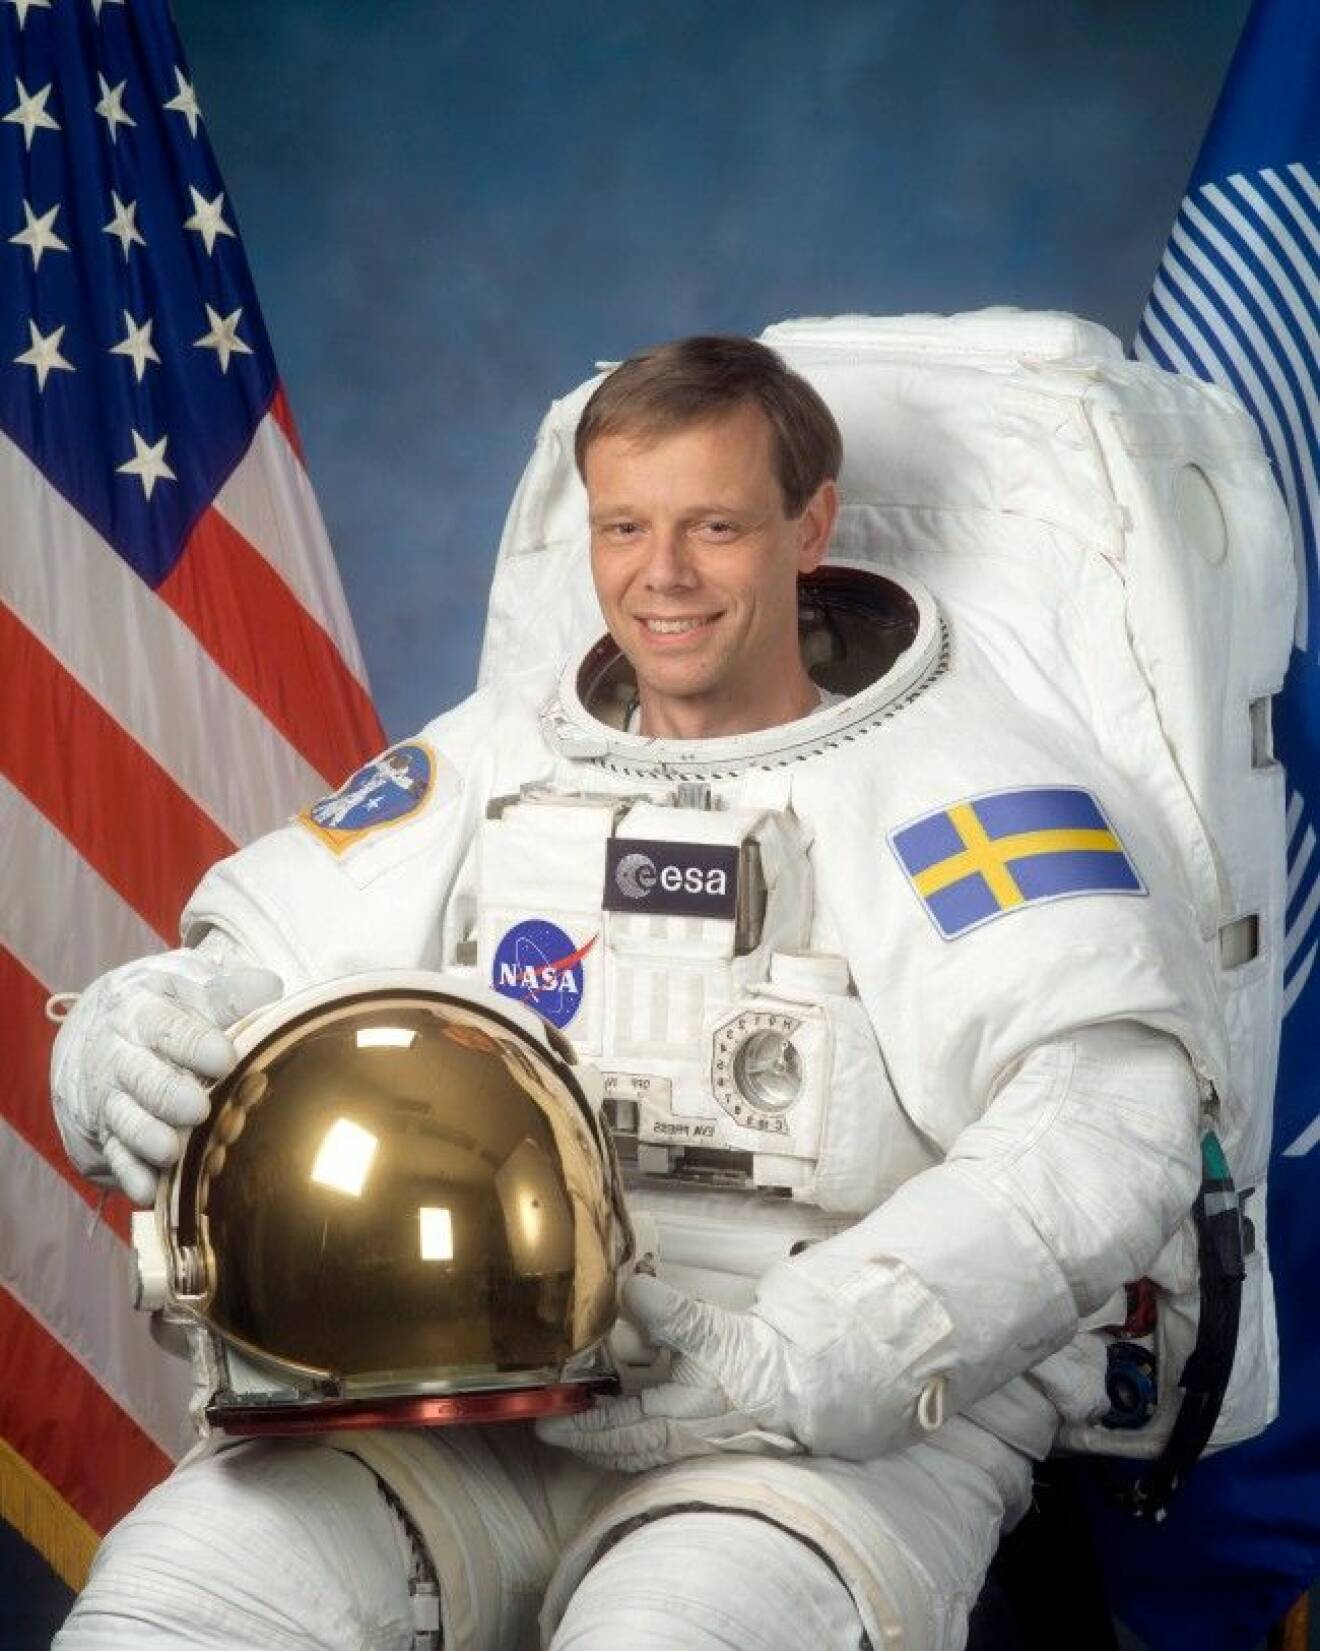 Christer Fuglesang (born 1957), Swedish astronaut. A member of the European Space Agency's (ESA) Astronaut Corps, Fuglesang is a crew member on the STS-116 Space Shuttle Discovery mission to the International Space Station (ISS) in December 2006. Photographed at NASA's Johnson Space Center in Houston, Texas, USA in January 2003. Foto: Science Photo Library / IBL Bildbyrå